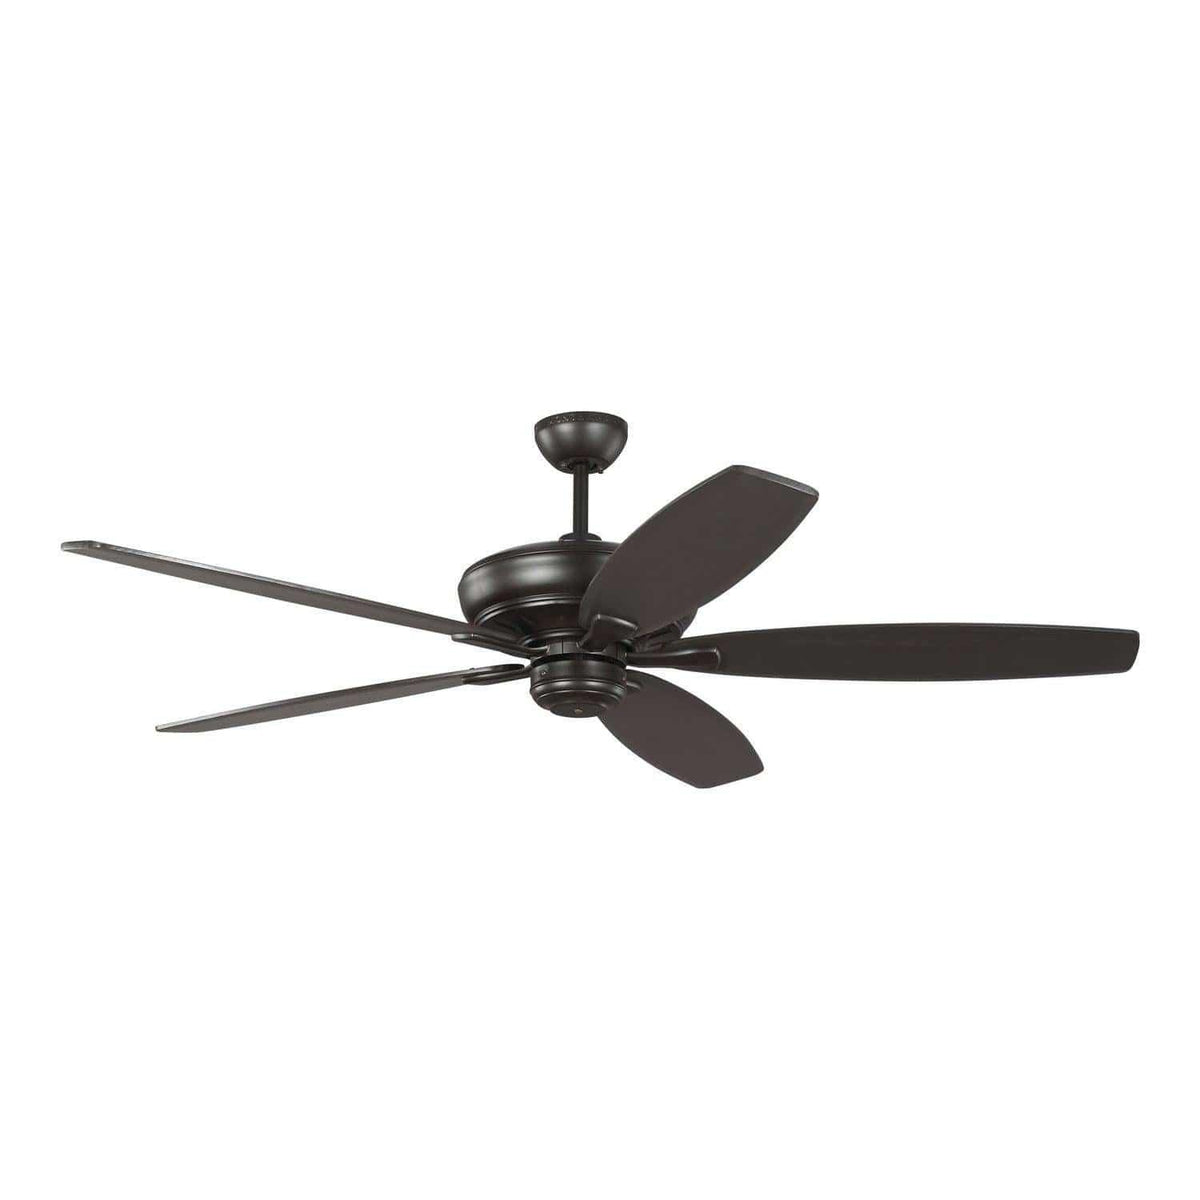 Visual Comfort Fan Collection - Dover Ceiling Fan - 5DVR60OZ | Montreal Lighting & Hardware